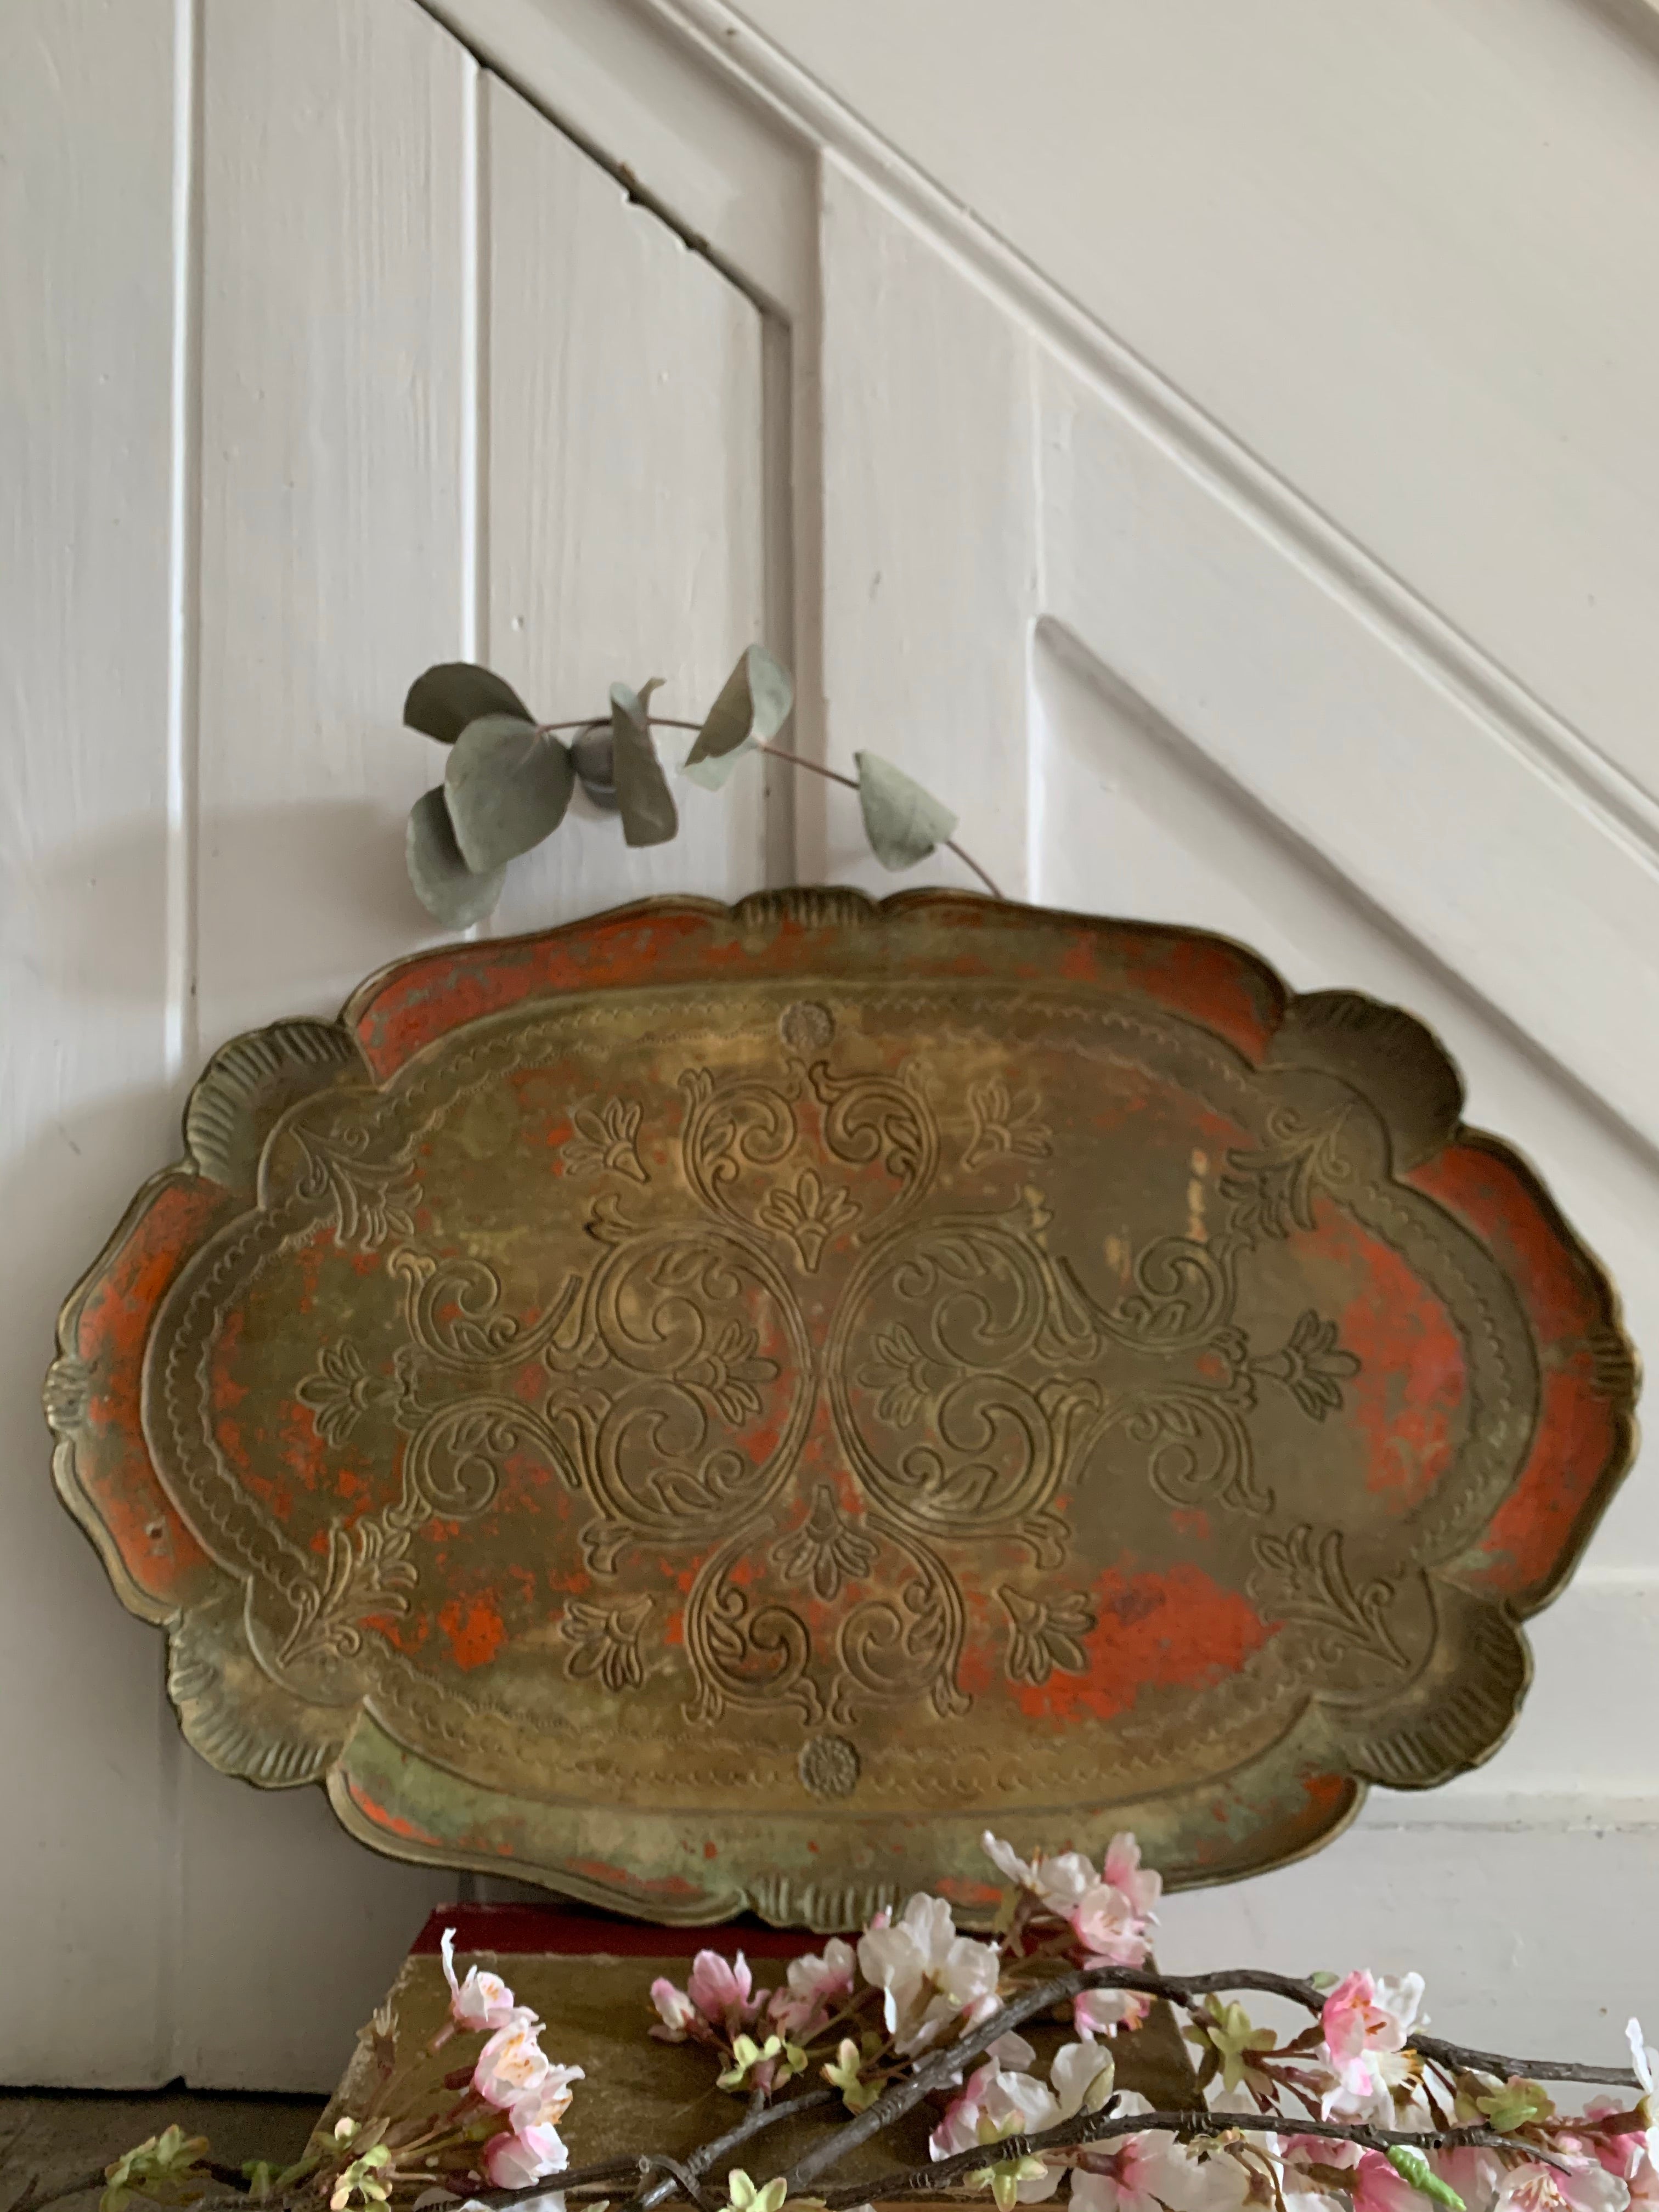 Large Muted Orange and Gold Florentine Tray